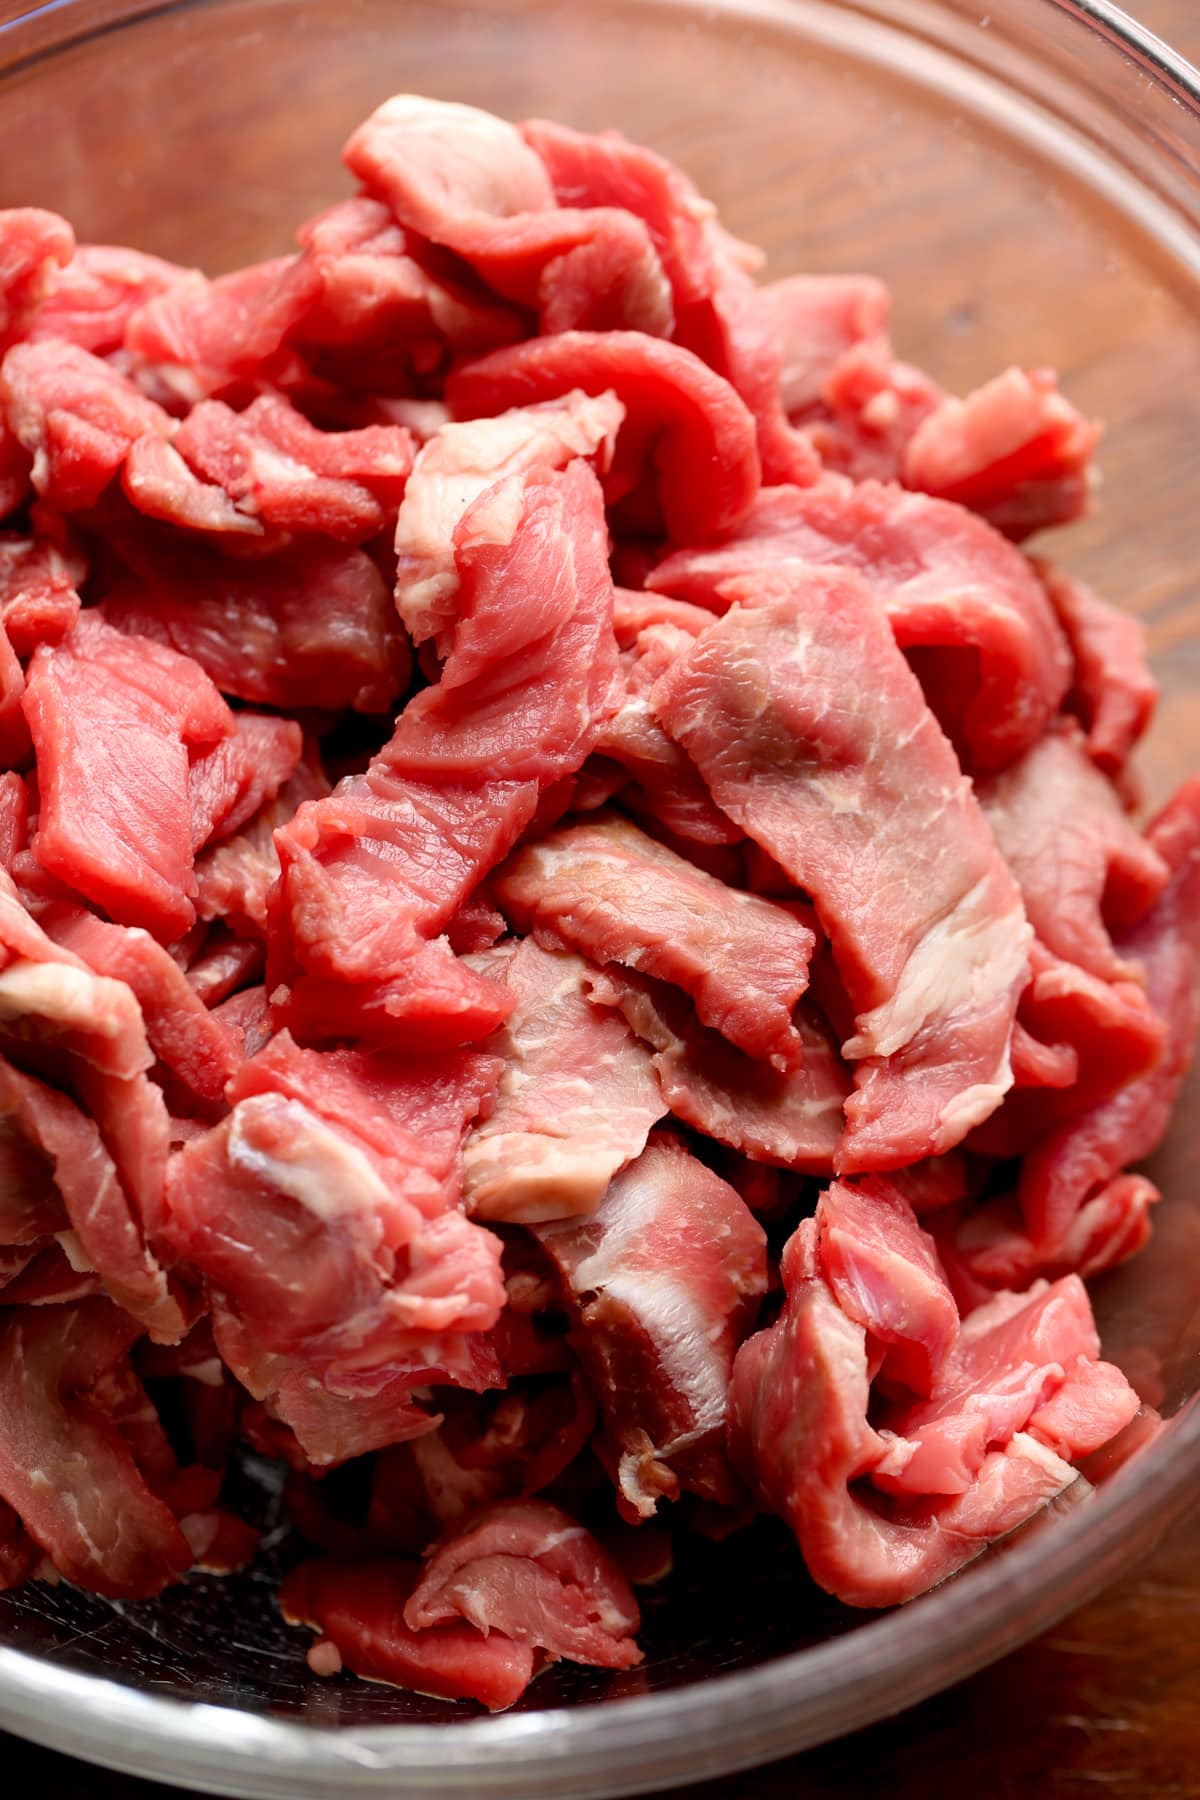 Raw steak slices in a bowl.